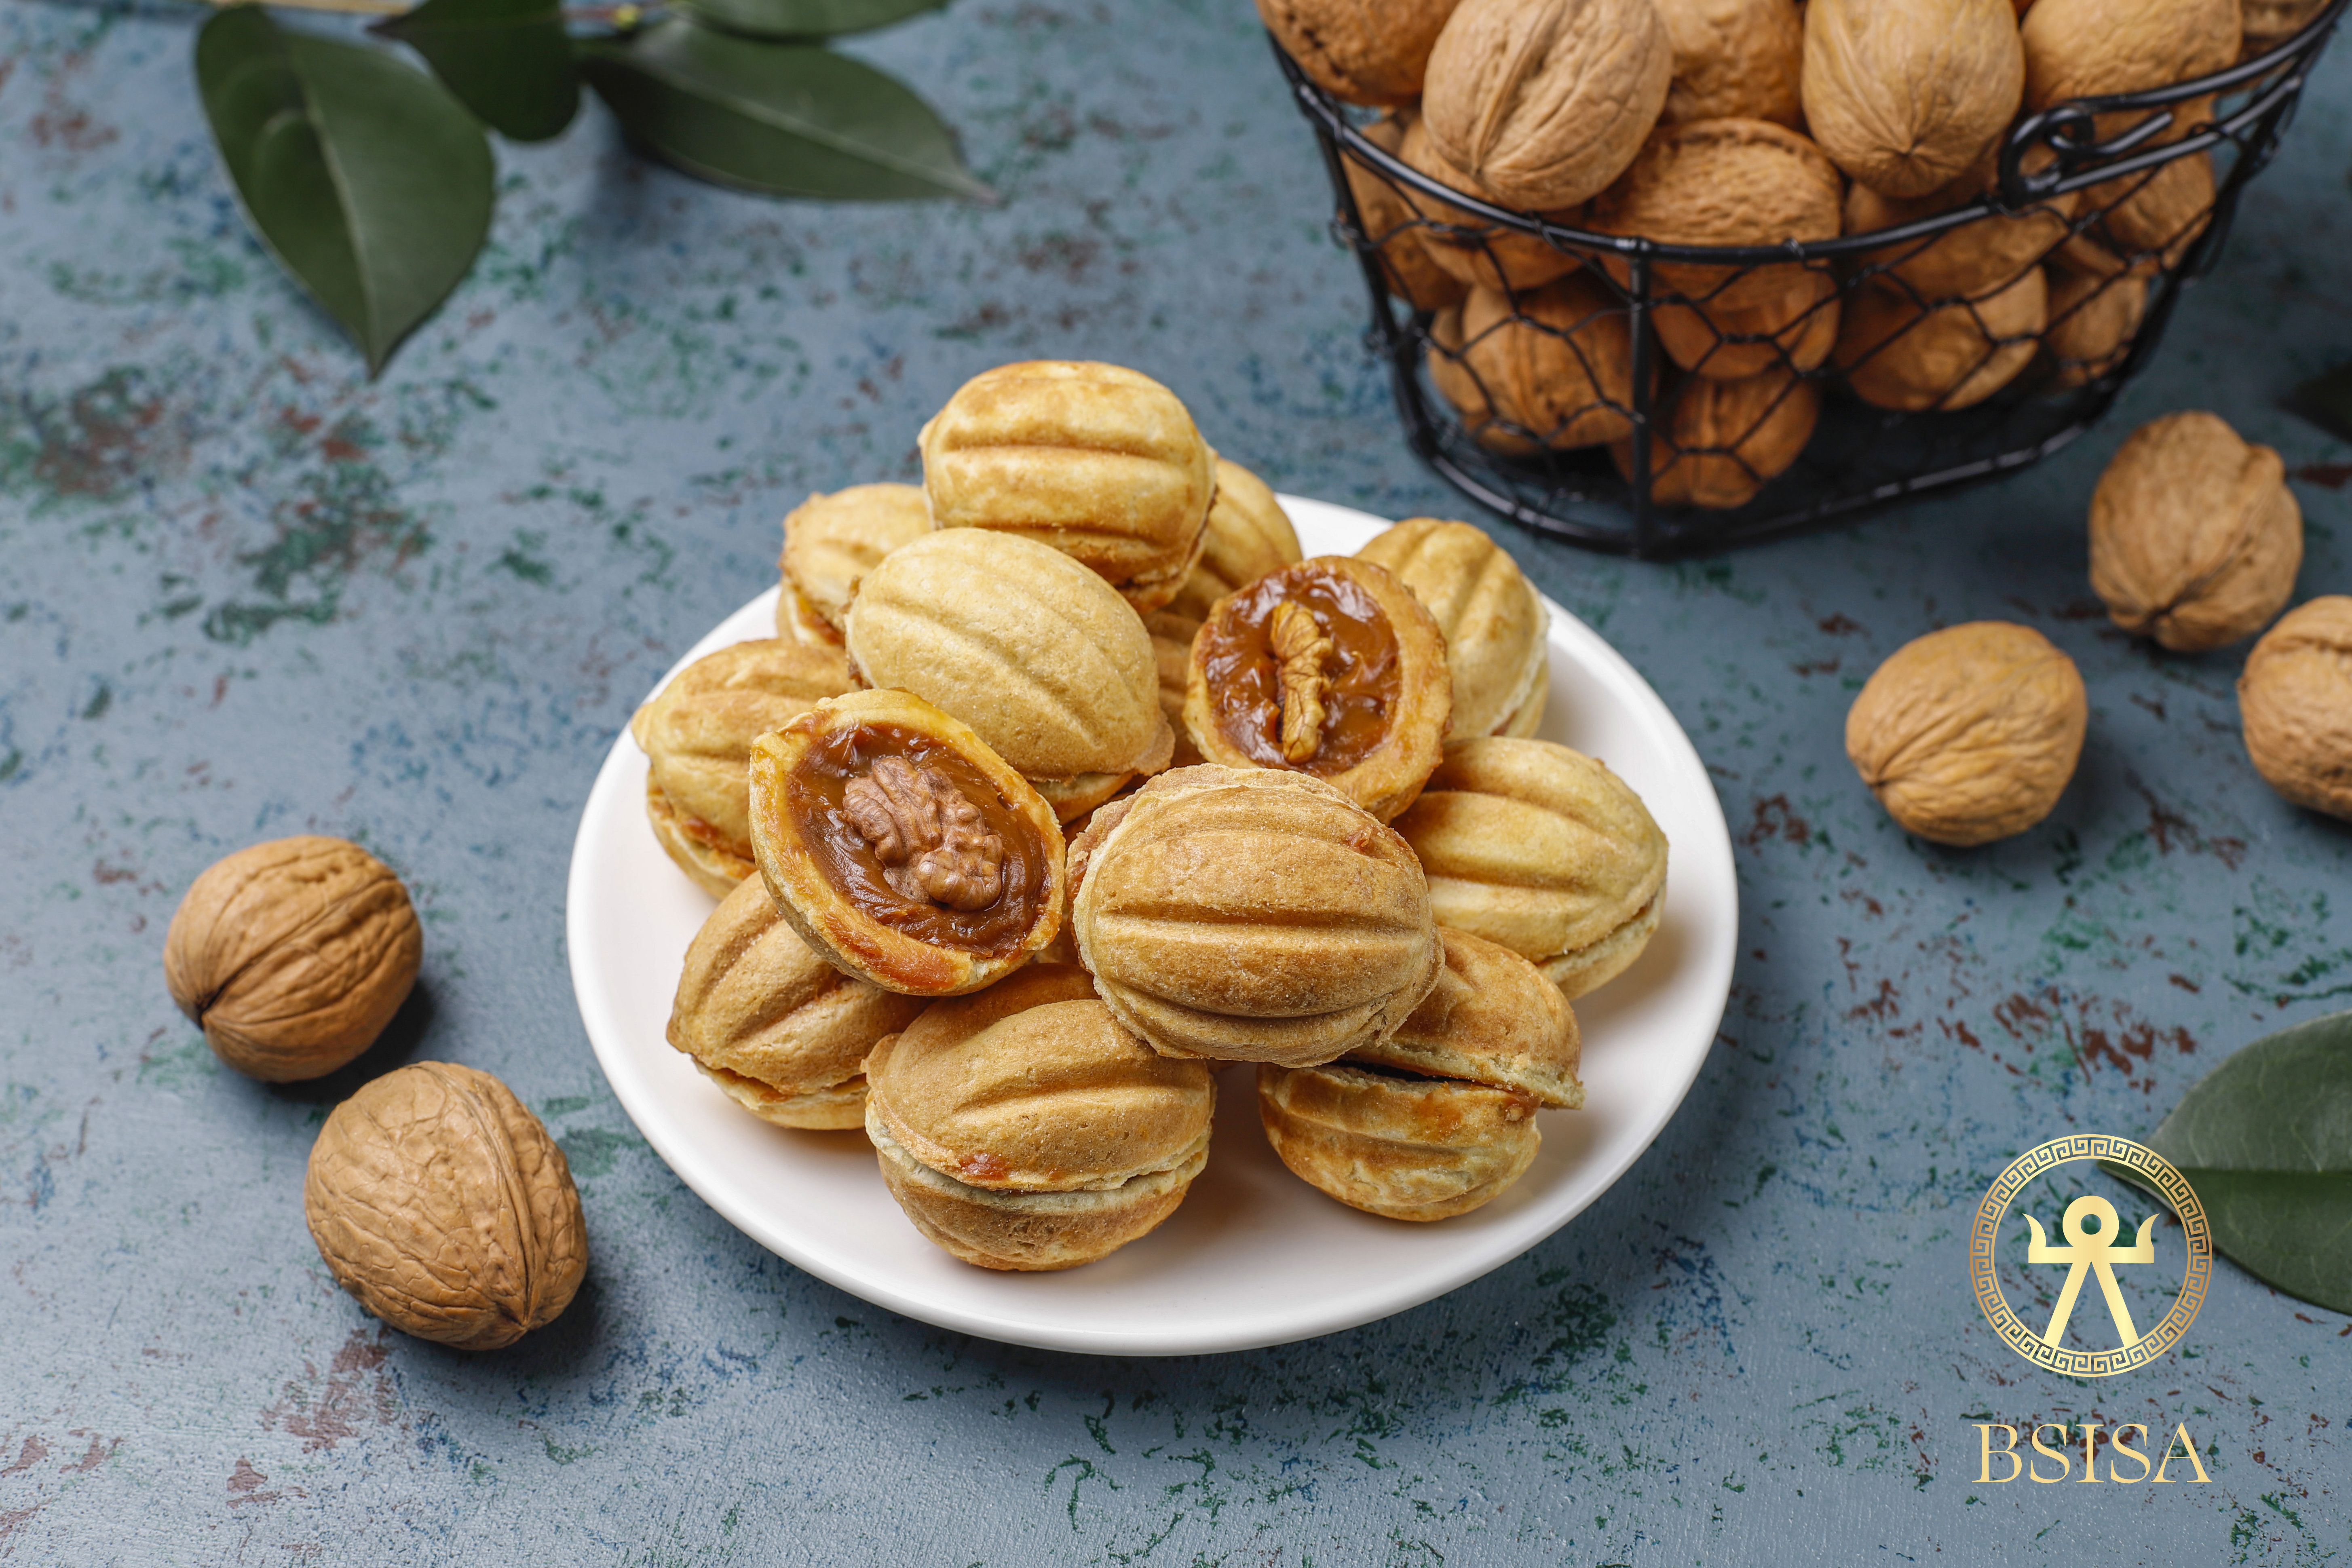 Cover Image for Revisited Oreshki : The Dulce De Leche filled Walnut Shaped Bsisa Cookies